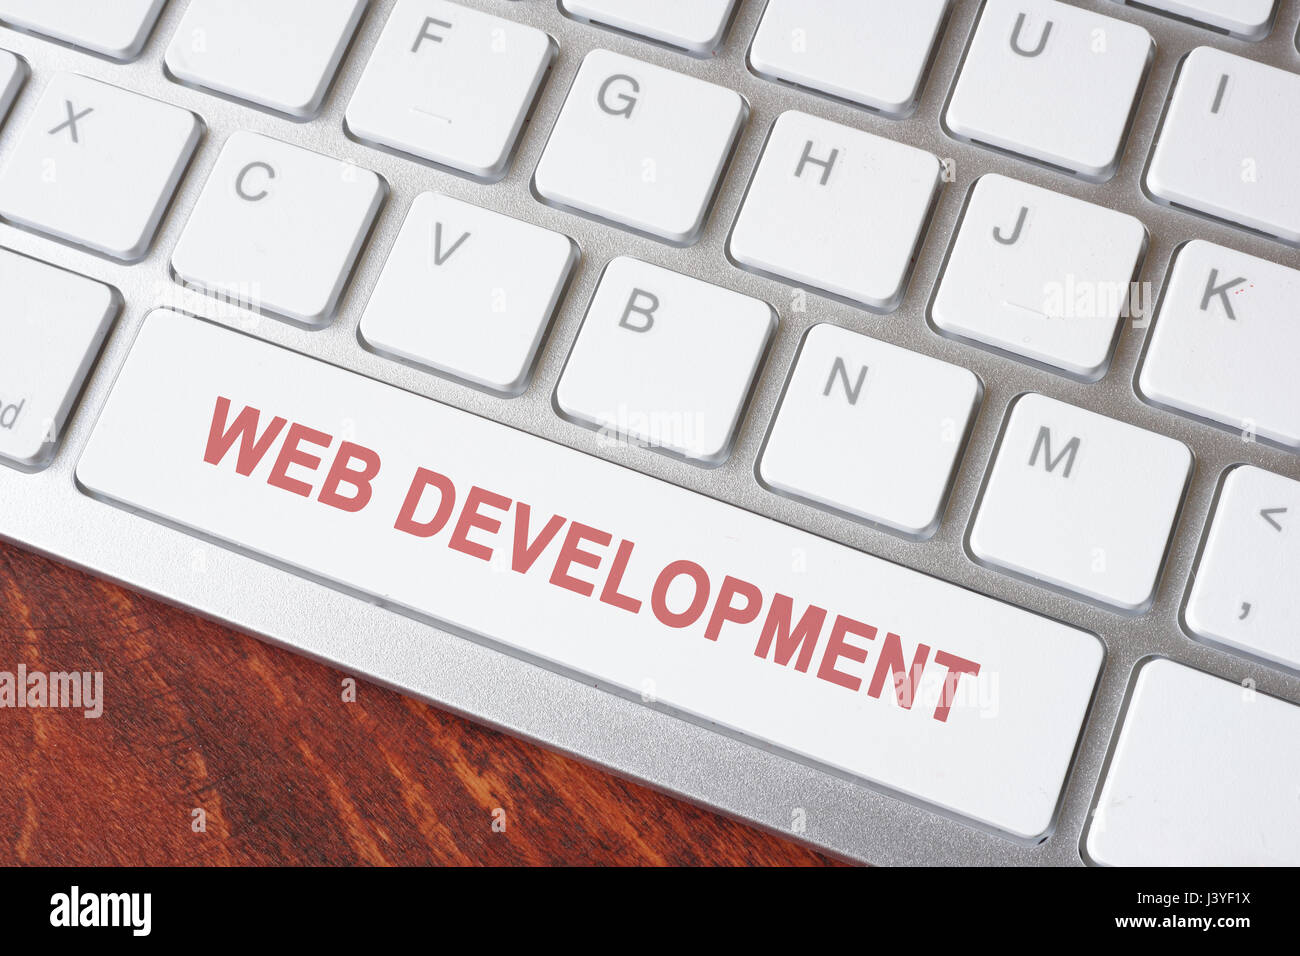 Button of keyboard with words Web development. Stock Photo